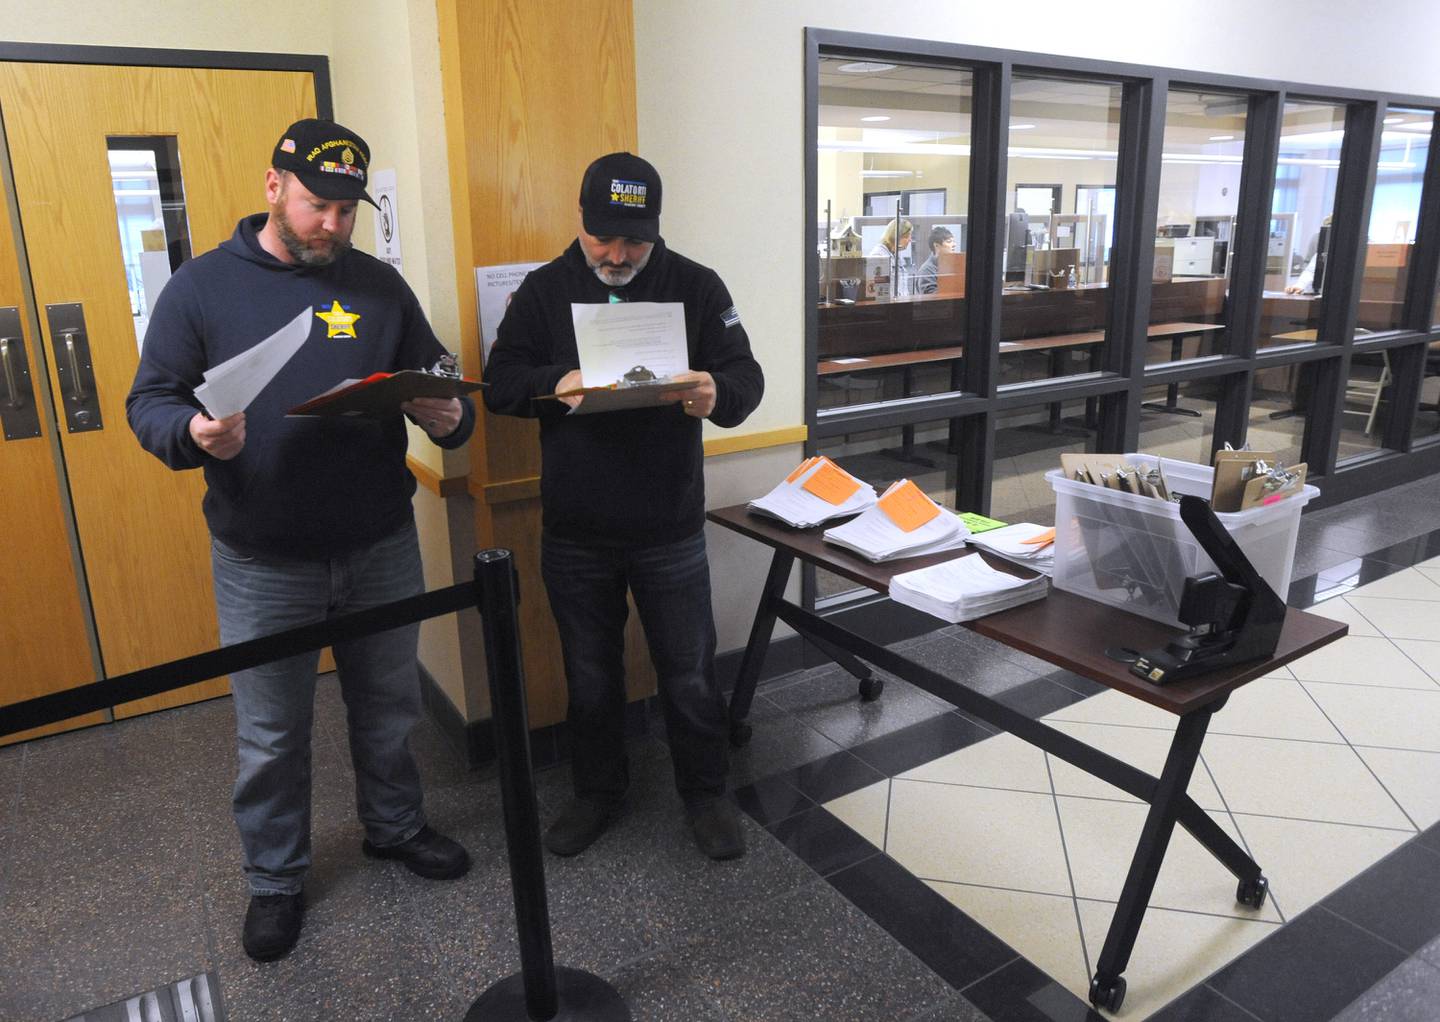 McHenry County sheriff candidate Tony Colatorti, right, and his campaign manager Kevin Byrnes look over the candidacy forms the morning of Monday, March, 7, 2022, at the McHenry County Clerk's Office in Woodstock. Monday was the first day for candidates to file ahead of the June primaries. This election season includes all McHenry County Board seats, the clerk, sheriff and regional superintendent of education. The candidates were trying to get the first slot on the ballot by filling at 8 a.m. When more than one candidate applies at a time, a lottery is held.